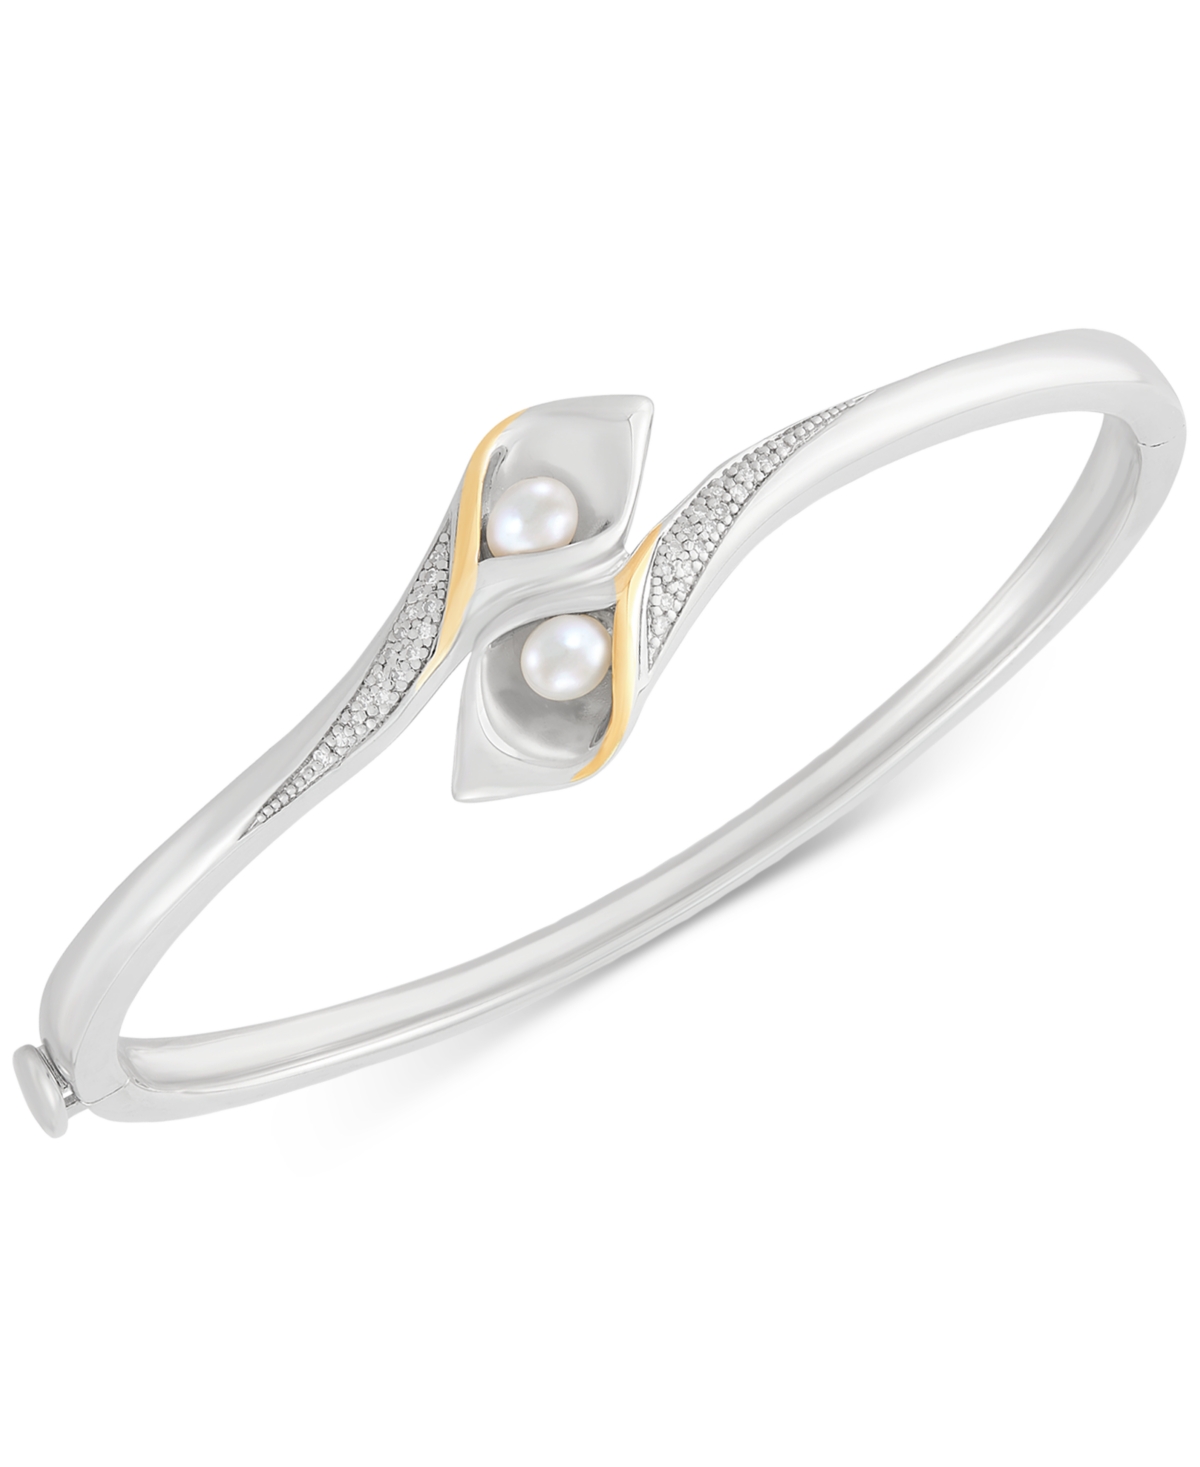 Cultured Freshwater Pearl (6 x 4mm) & Diamond (1/10 ct. t.w.) Flower Bud Inspired Bangle Bracelet in Sterling Silver & 14k Gold - Silver